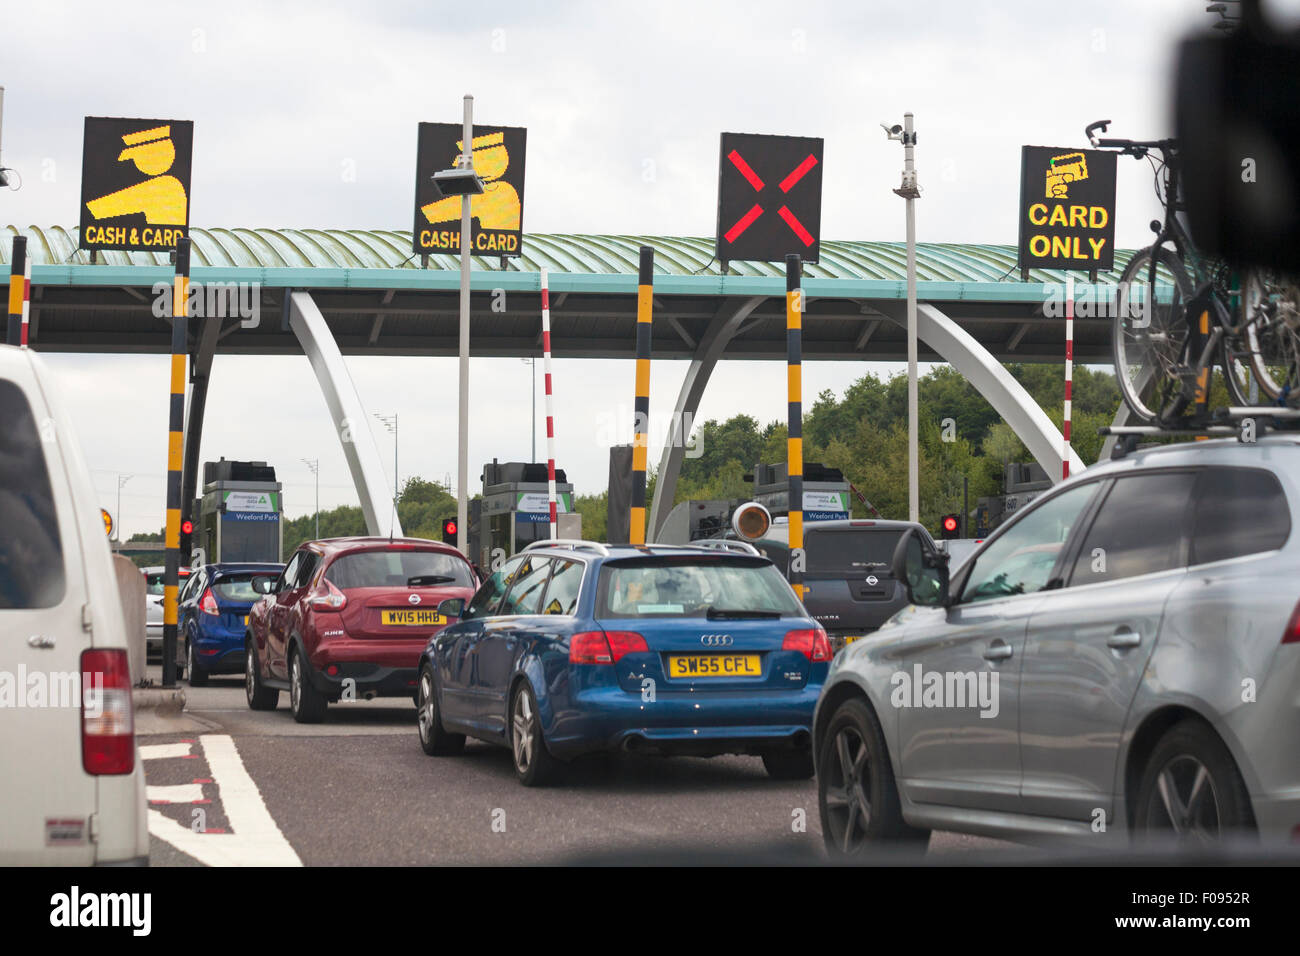 M6 toll road payment booths with cash & cards lanes or card only lane, Staffordshire Stock Photo